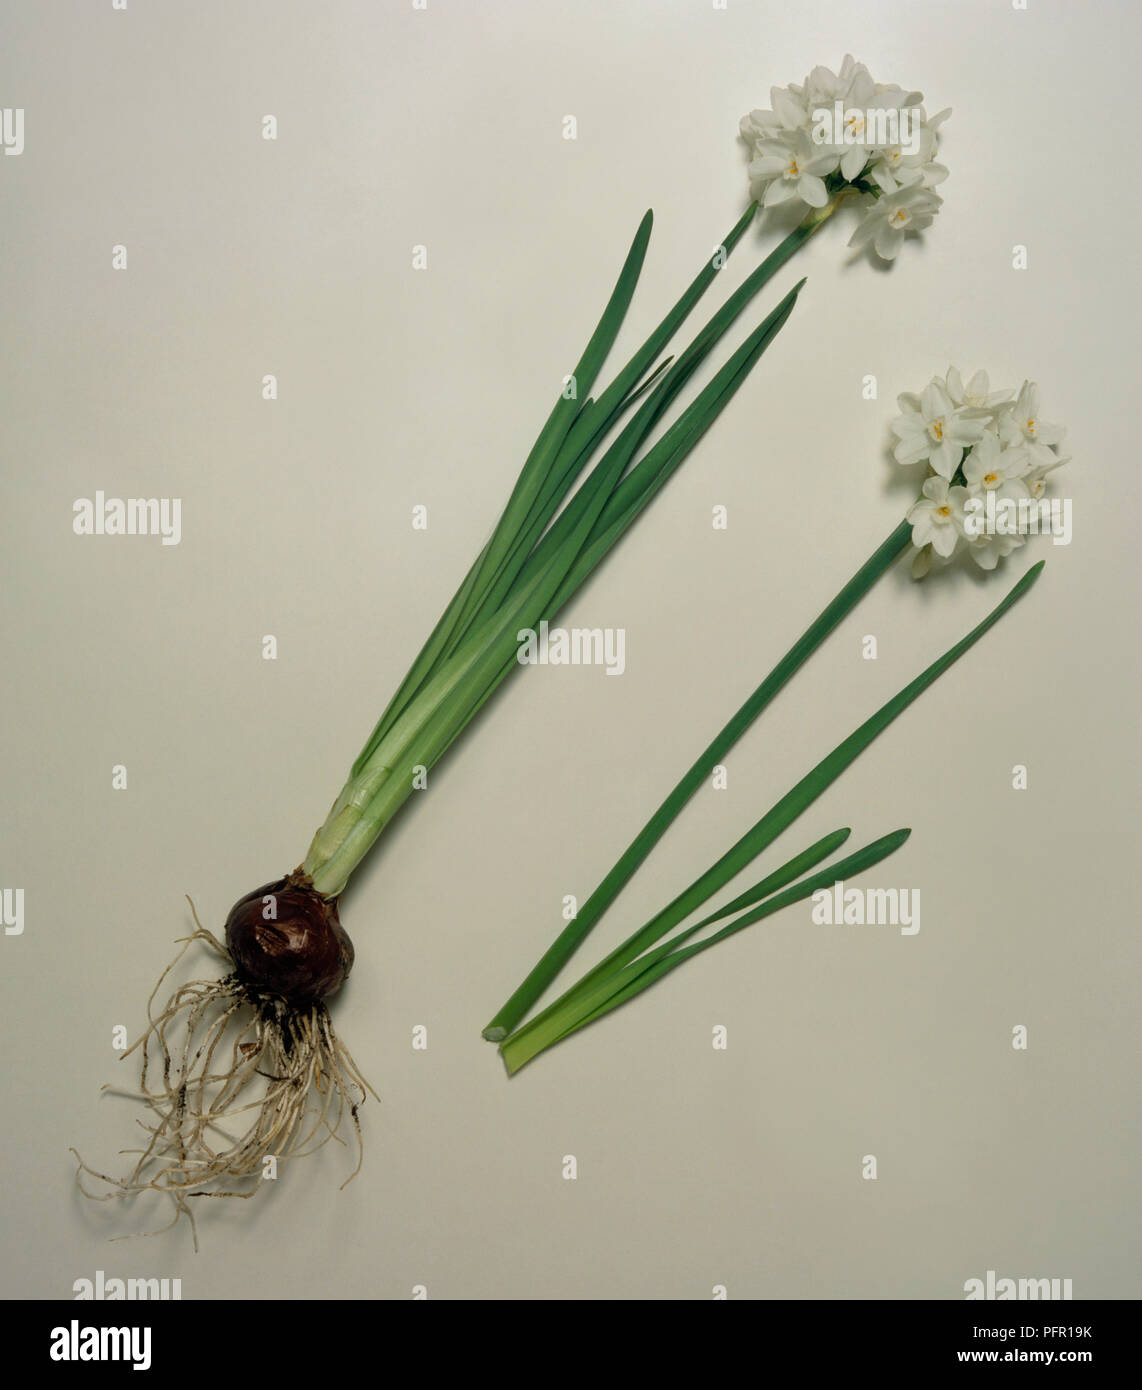 Narcissus papyraceus (Paper-white narcissus), flowers with bulbs and leaves Stock Photo